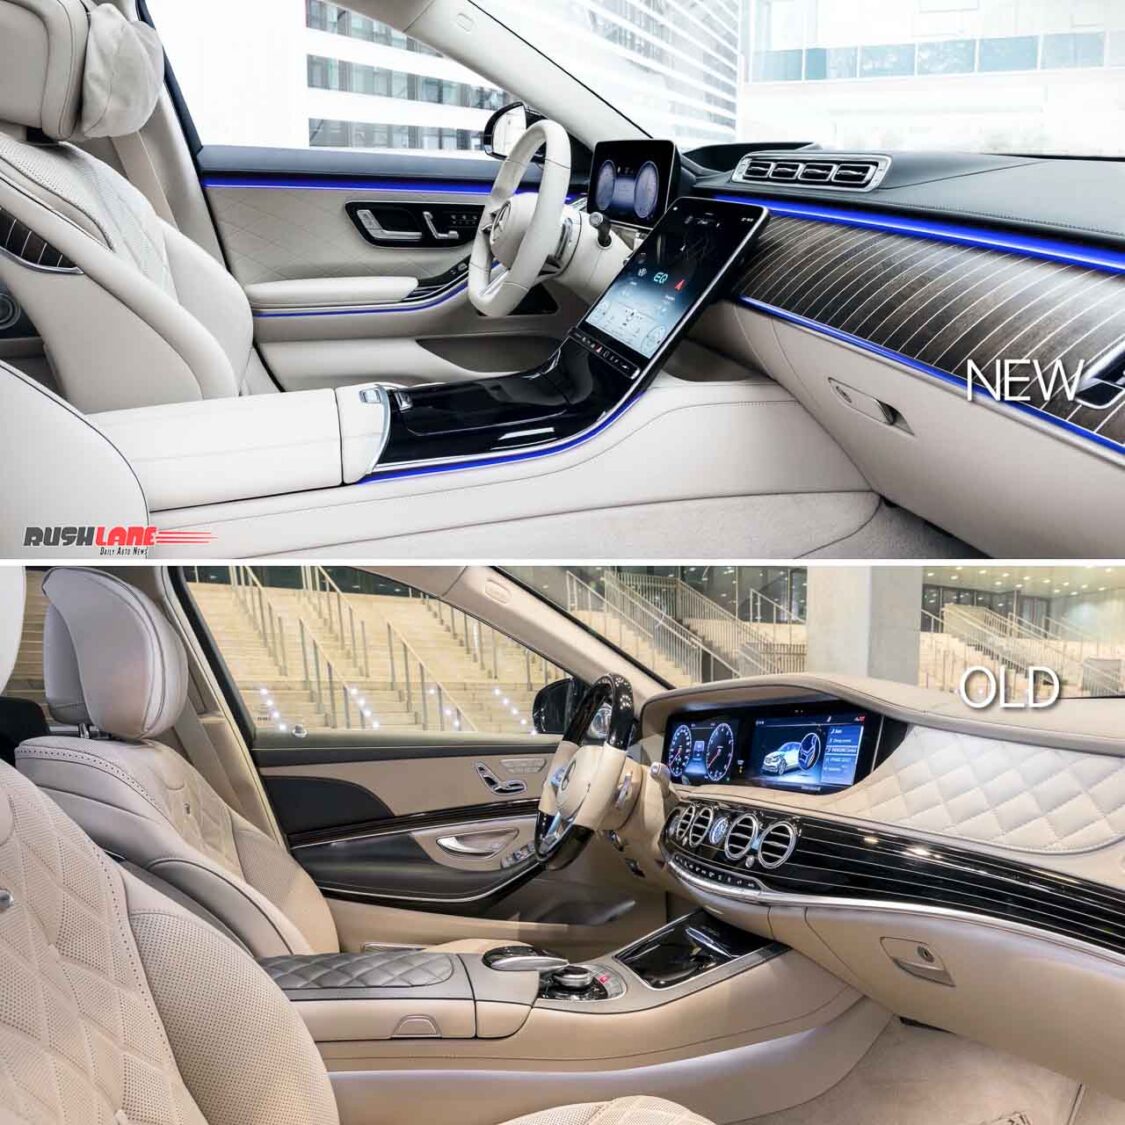 21 Mercedes S Class Old Vs New Exteriors And Interiors Compared